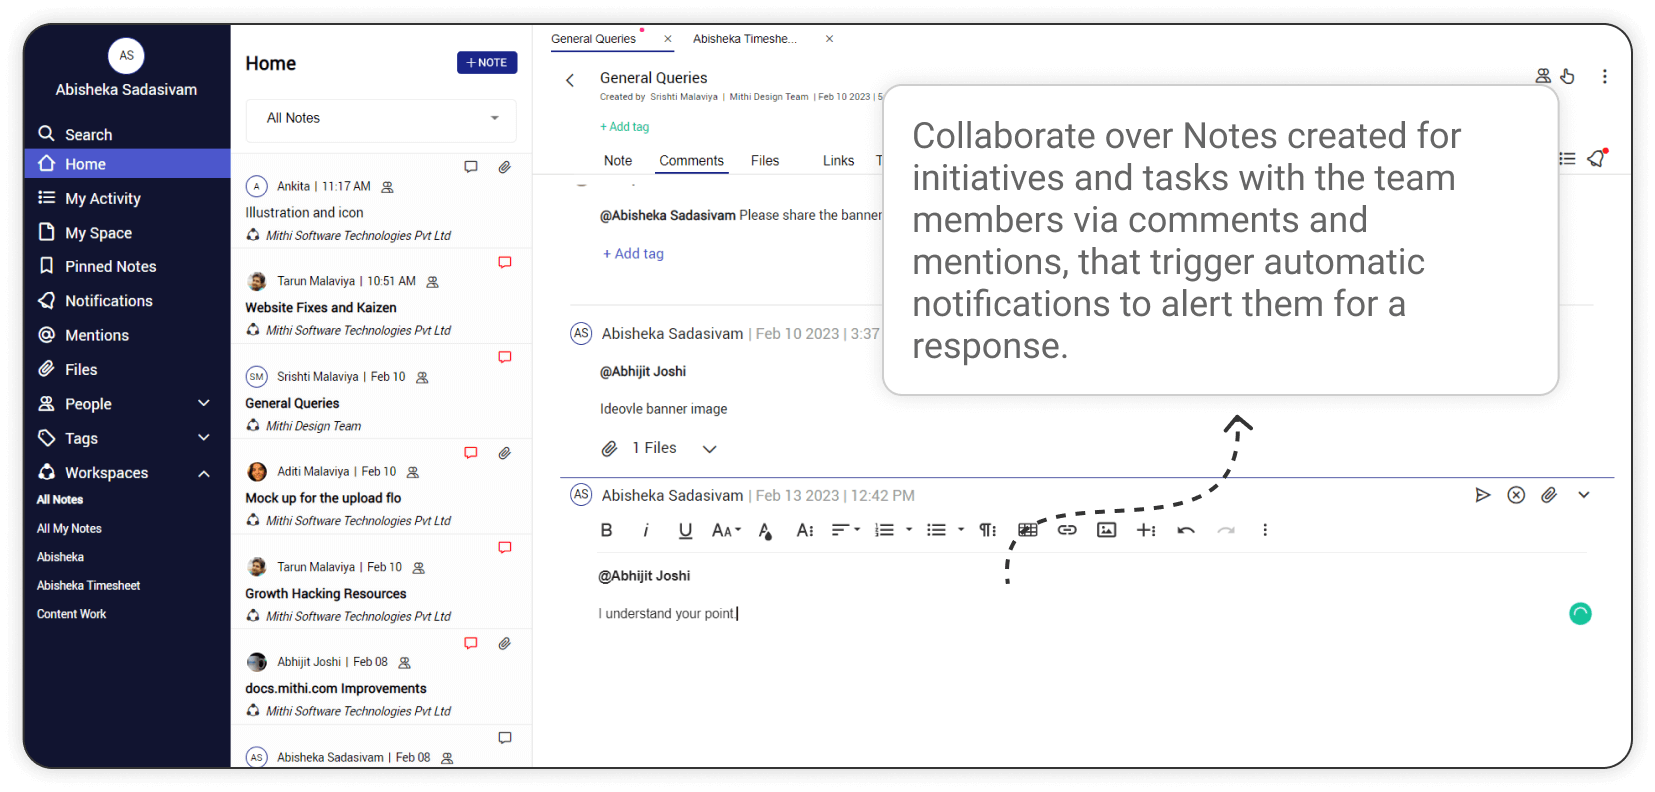 Collaborate over Notes created for initiatives and tasks with the team members via comments and mentions, that trigger automatic notifications to alert them for a response.